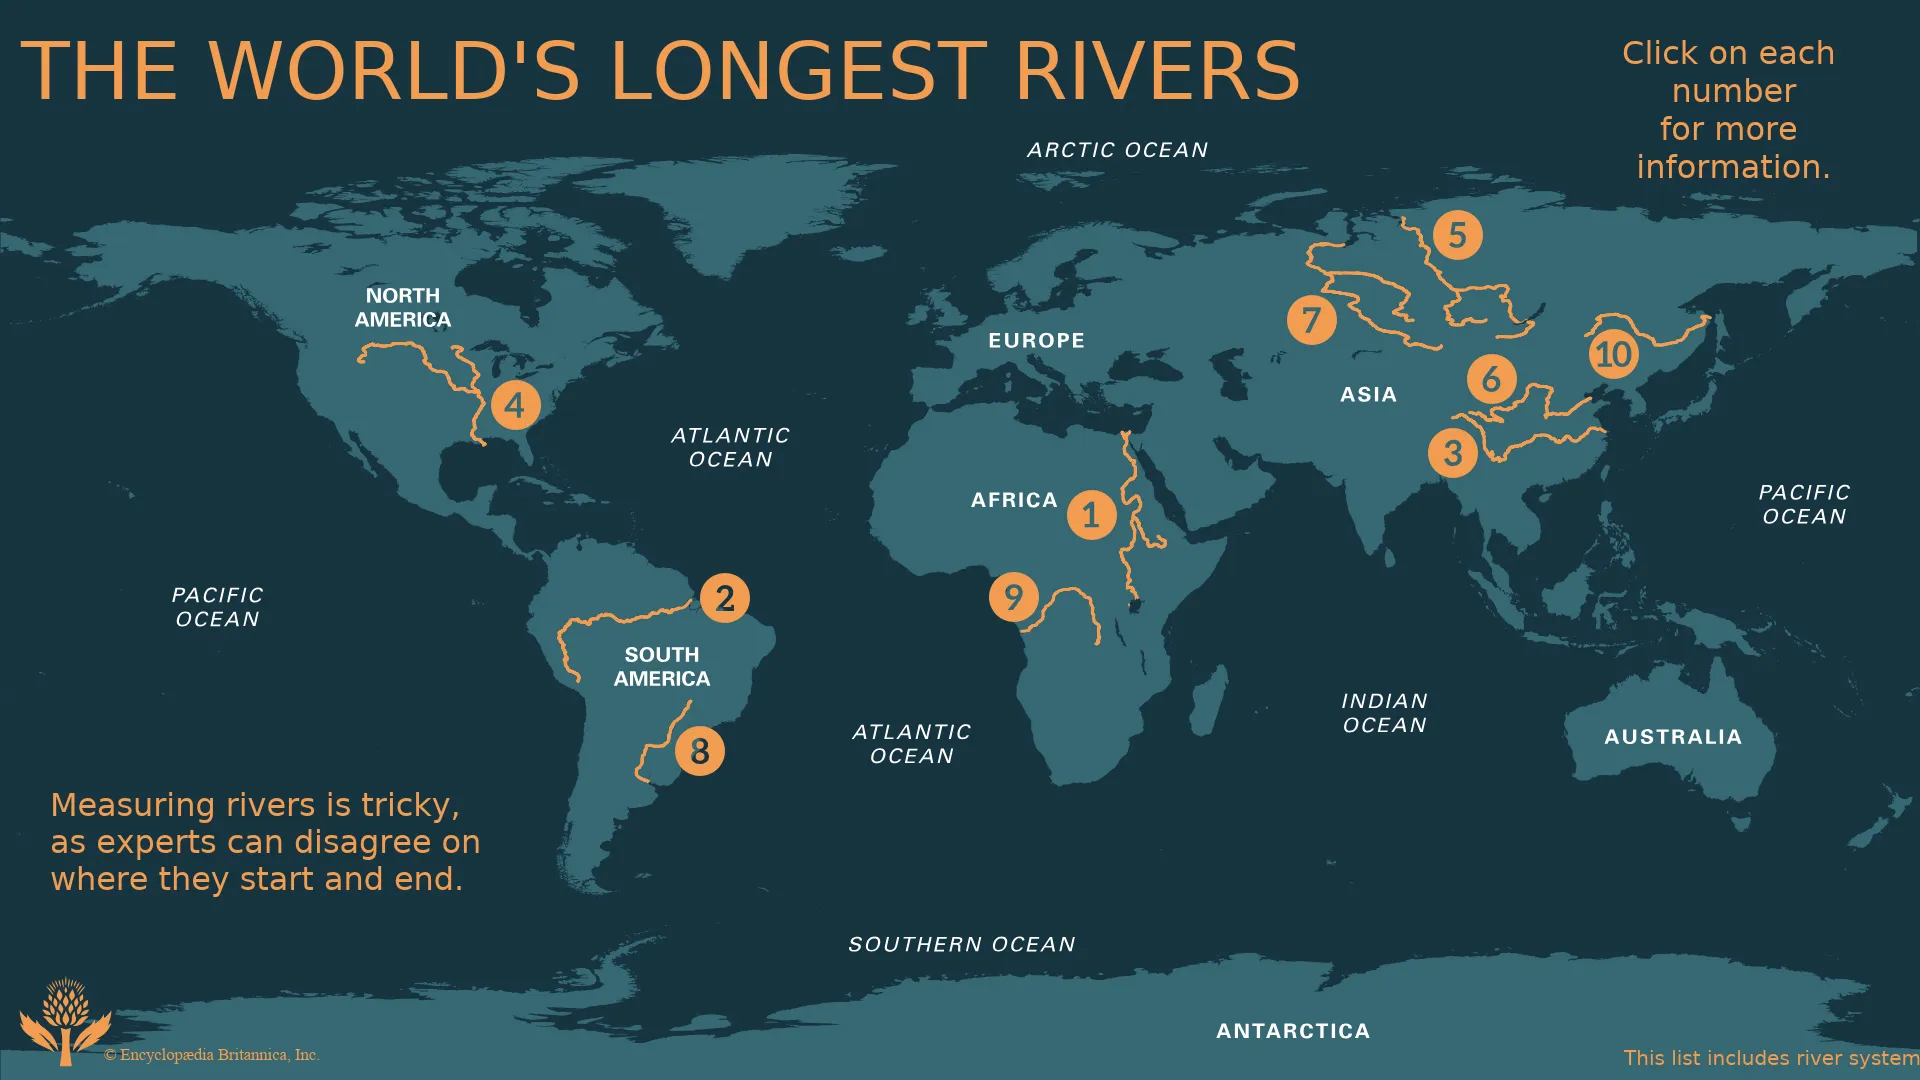 The top 10 longest rivers in the world are the Amazon, Nile, Yangtze, Mississippi-Missouri, Yenisei-Angara-Selenge, Yellow, Ob-Irtysh, Paraná, Congo, and Amur rivers. These rivers flow through various countries, shaping landscapes and providing resources to millions of people.